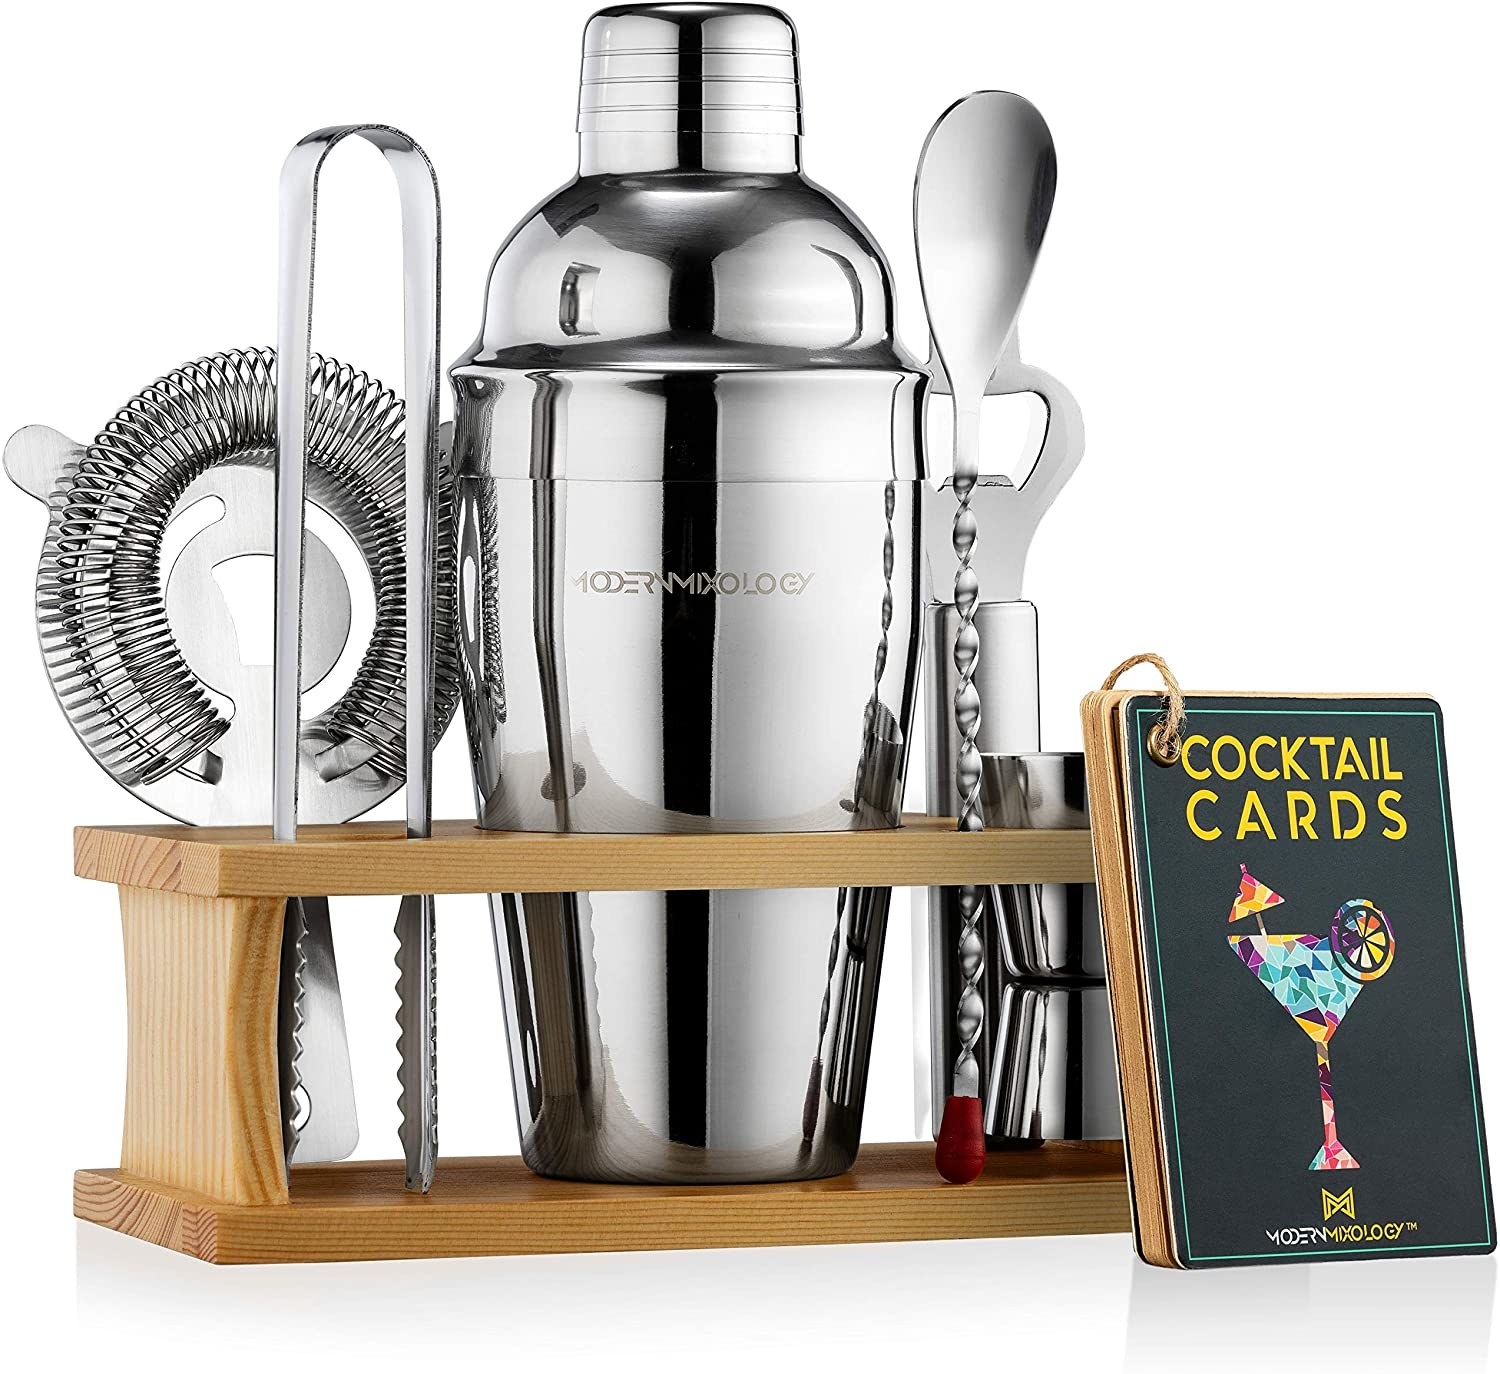 mixology set with shaker and tools in wood stand, cocktail cards